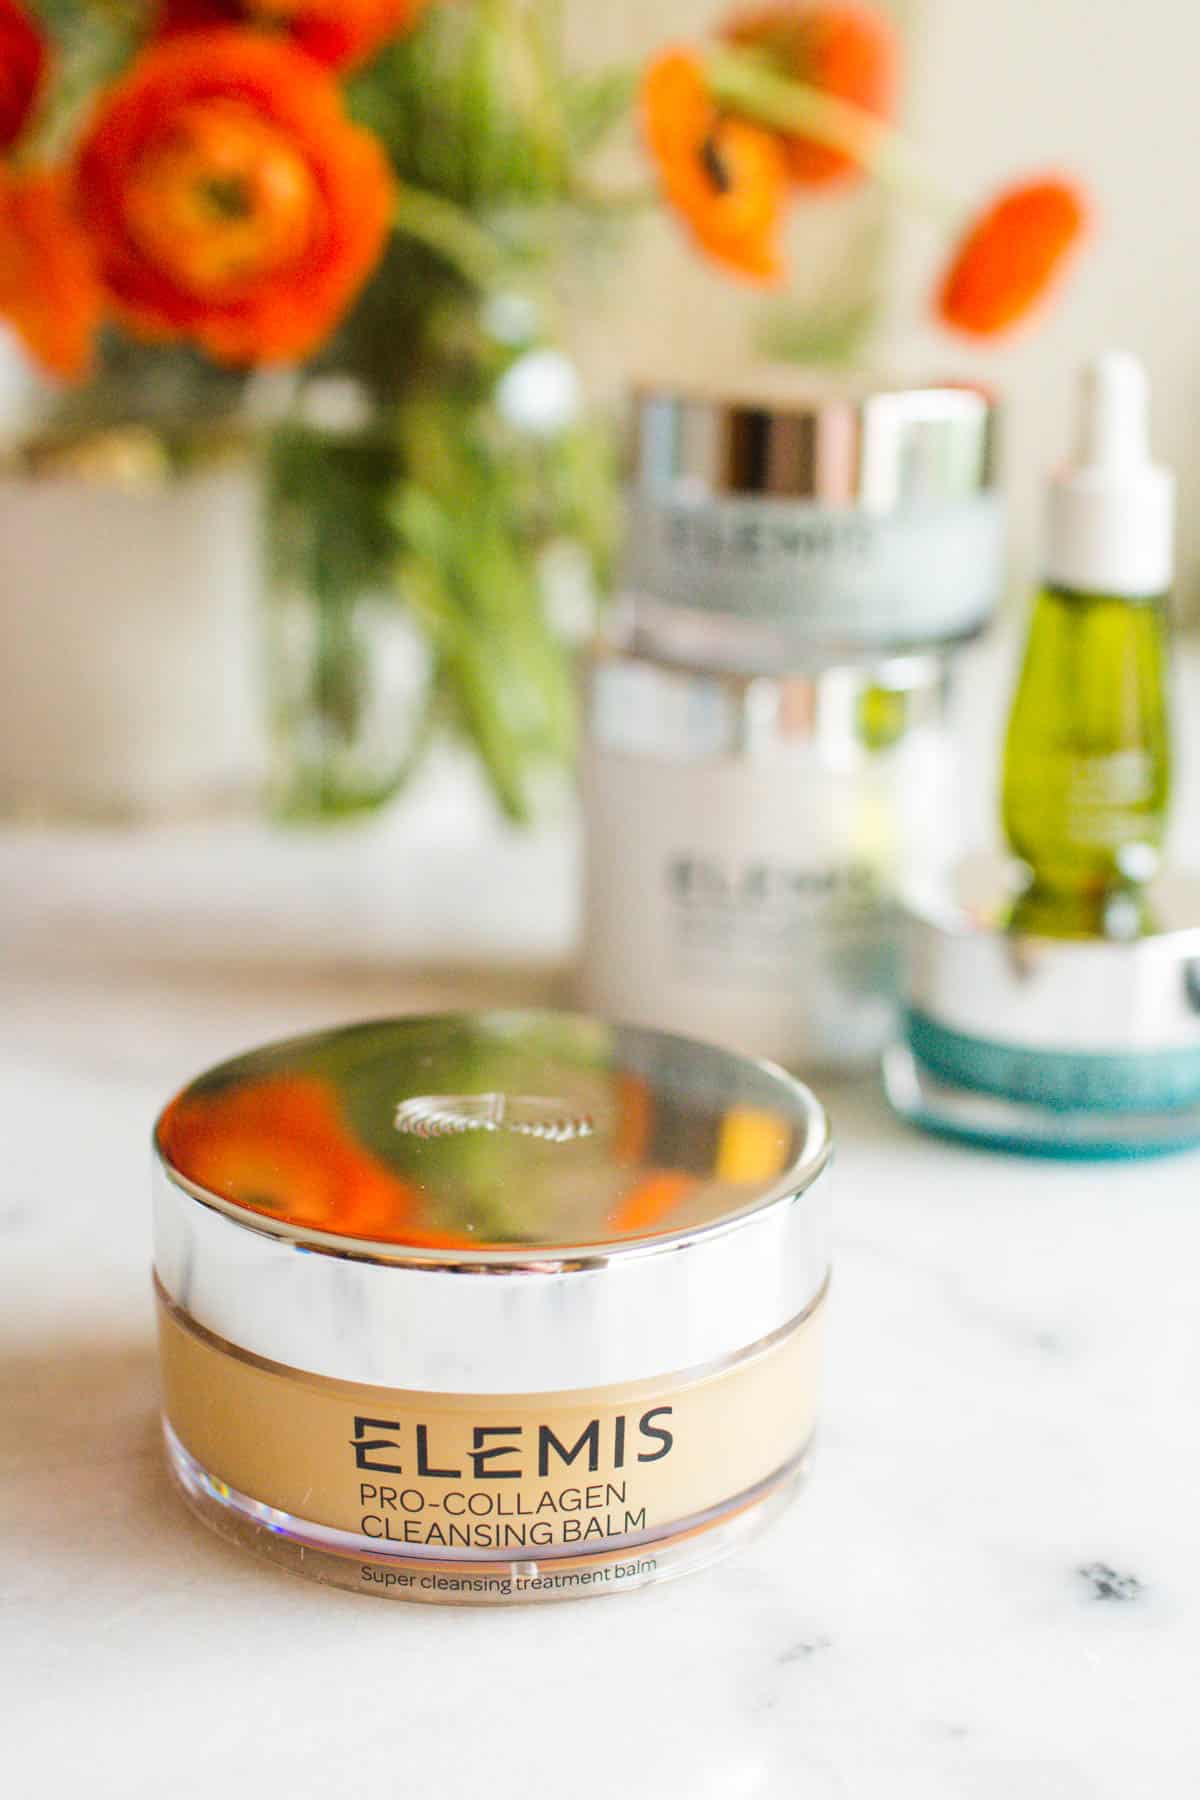 Elemis Pro-Collagen Cleansing Balm on a counter with other Elemis skincare products in the background.